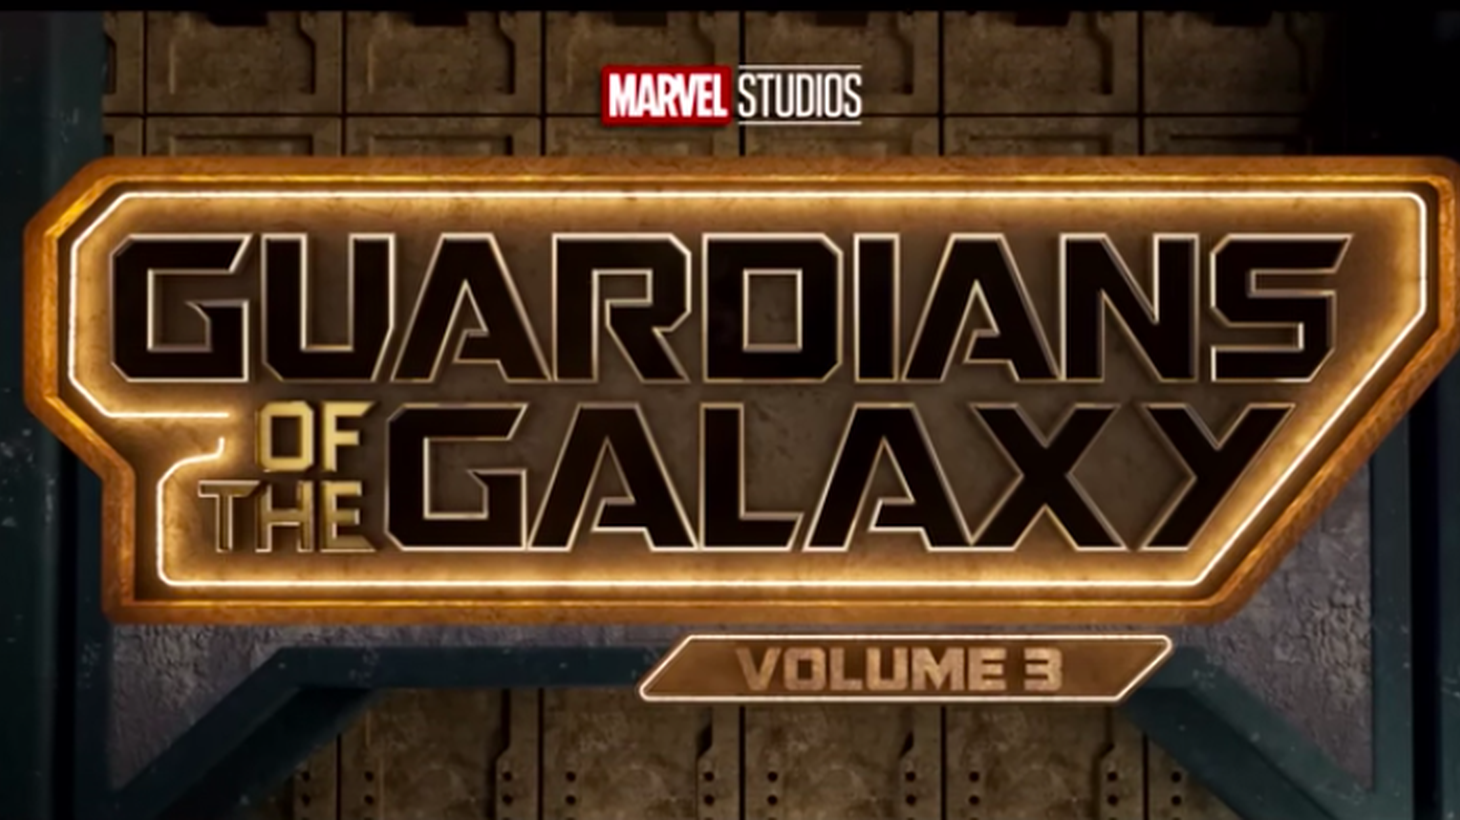 In “Guardians of the Galaxy, Vol. 3,” the heroes must protect Rocket – the mercenary raccoon – played by Bradley Cooper.